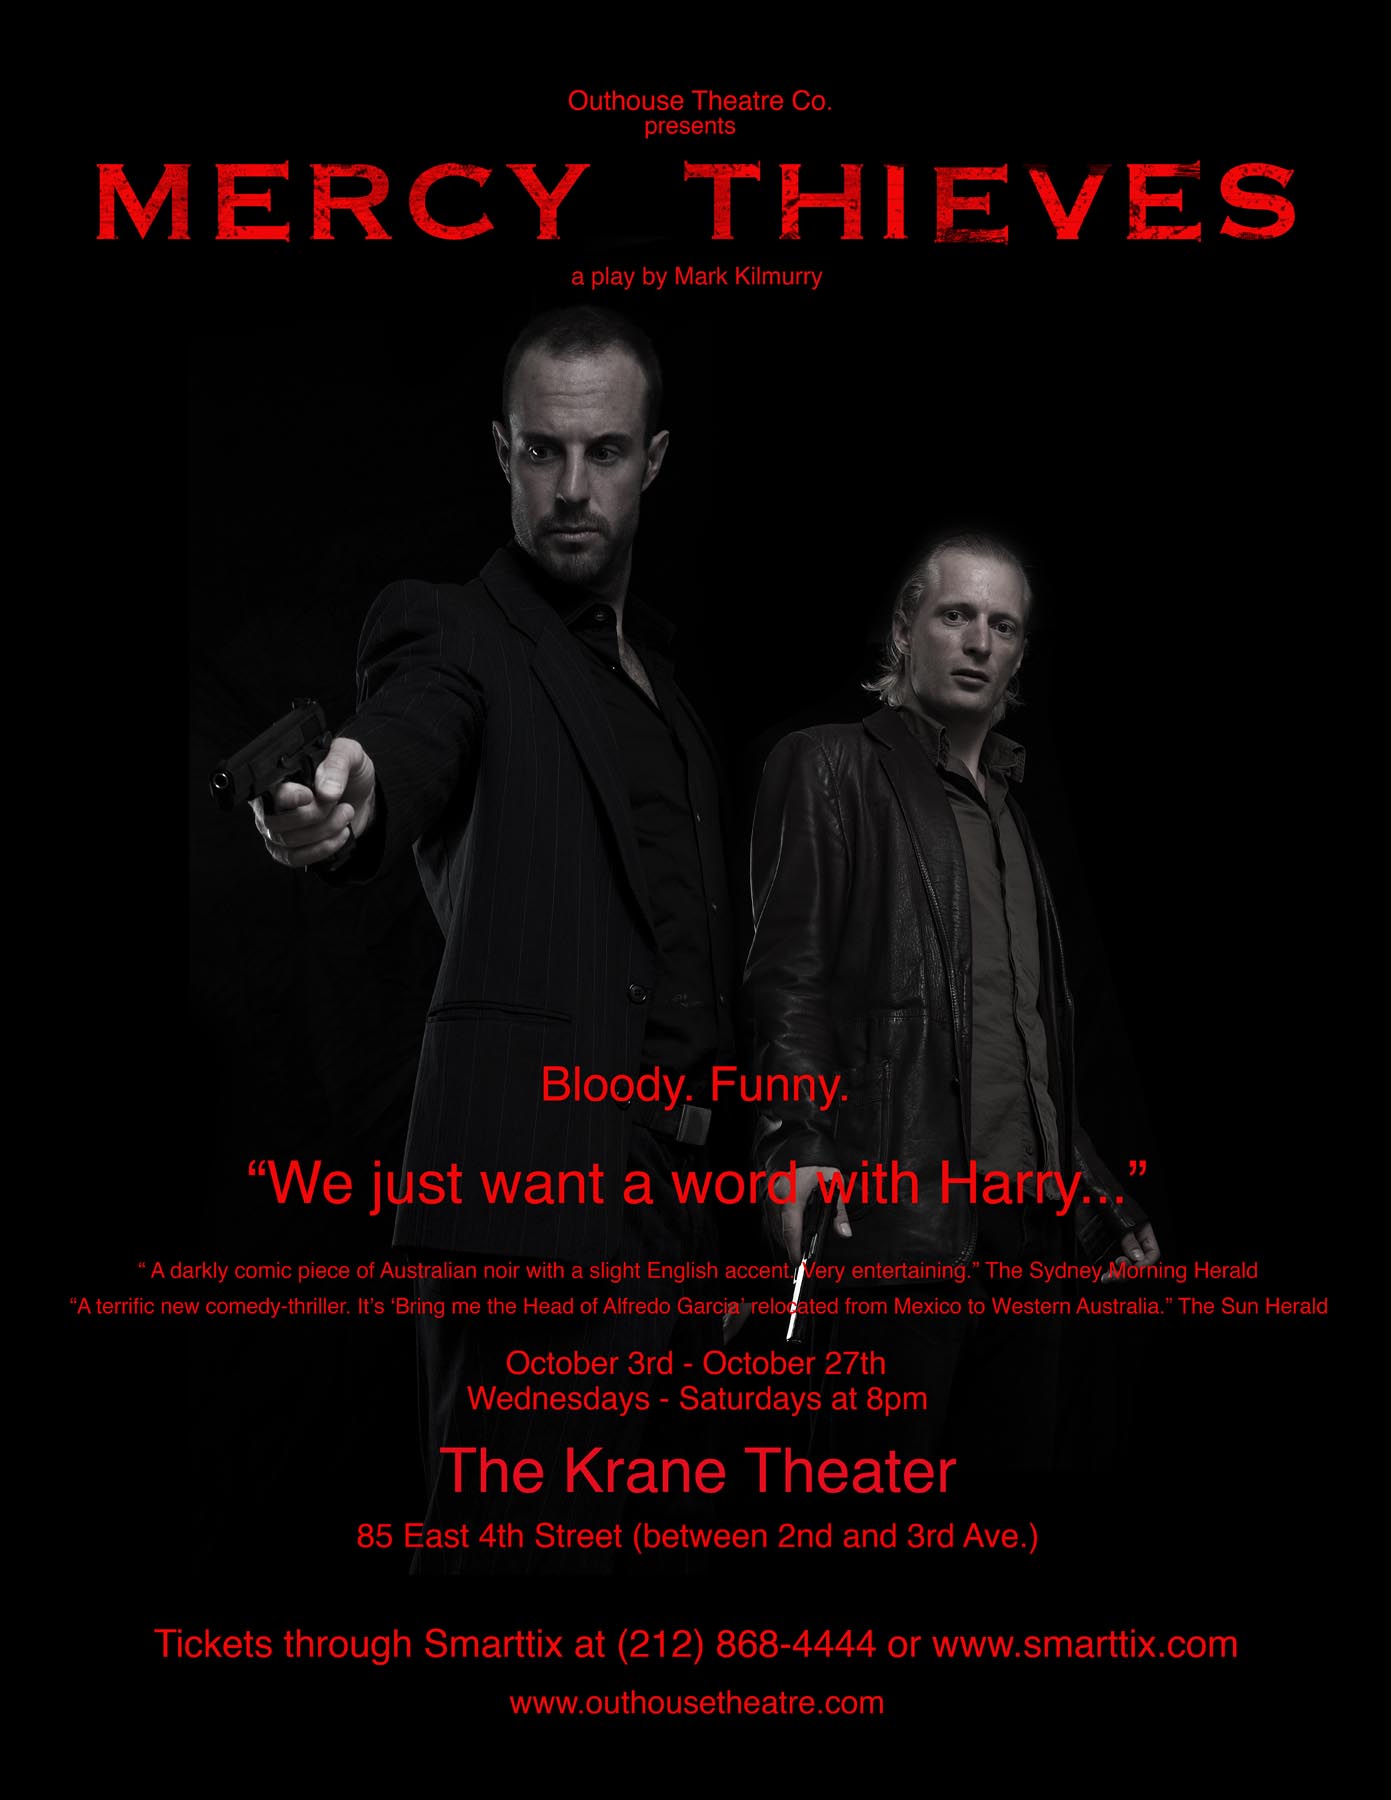 Outhouse Theater Company's production of Mercy Thieves. 2008, NYC